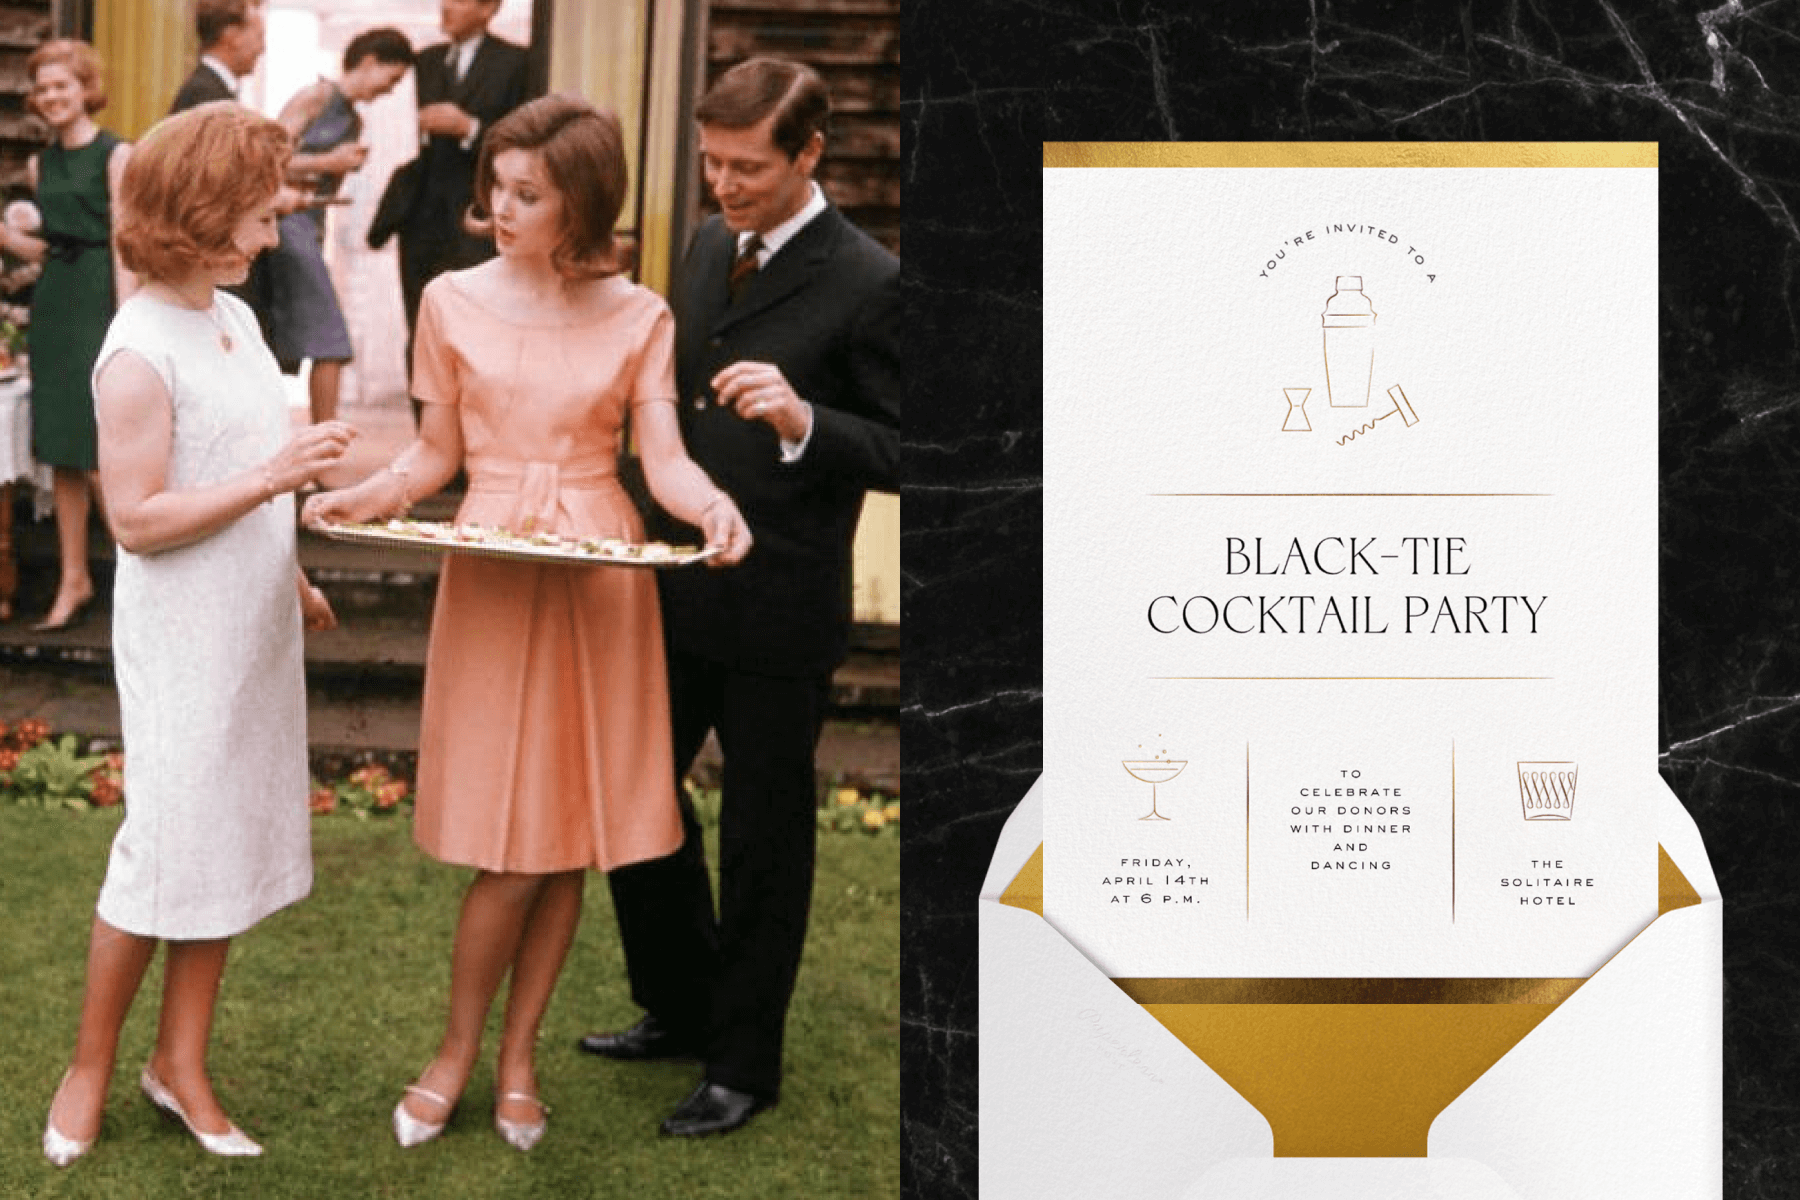 Left: a vintage photograph of a woman handing out hors d’oeuvres at a party; right: a white and gold cocktail party invitation featuring illustrations of a cocktail stirrer, glasses, and other accessories.